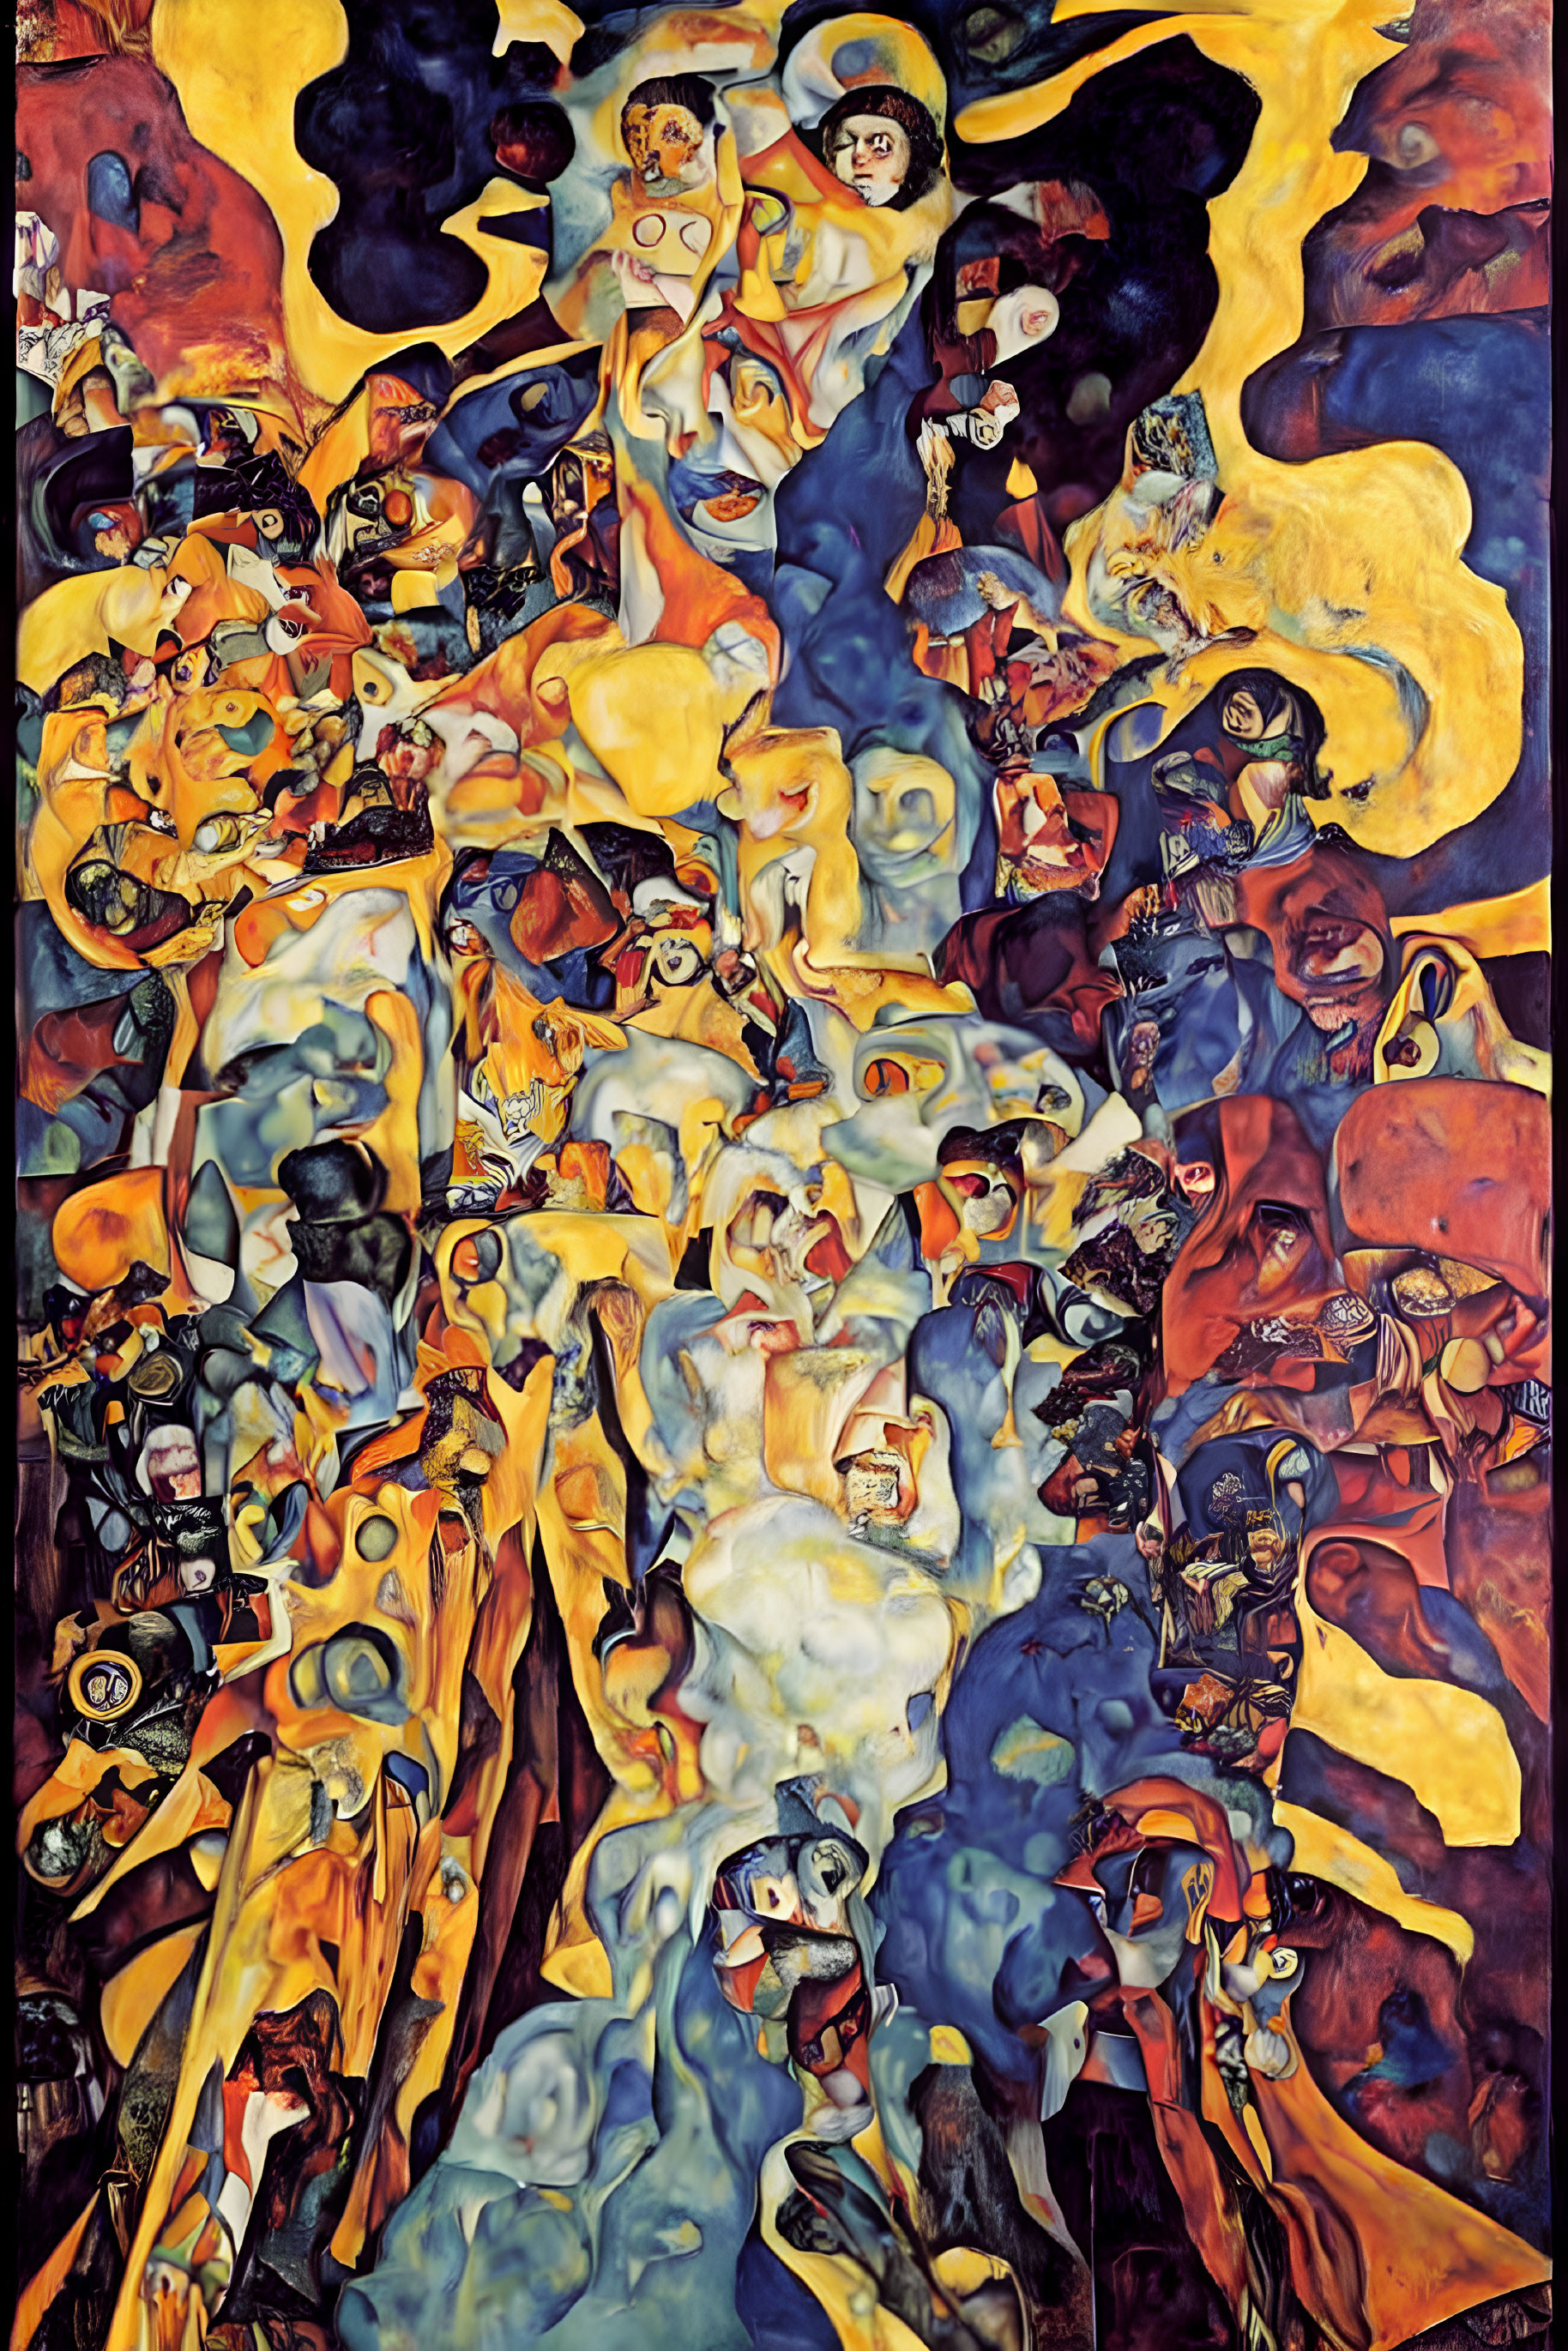 Vividly colored abstract painting with intertwined human figures and faces in front of swirling backdrop